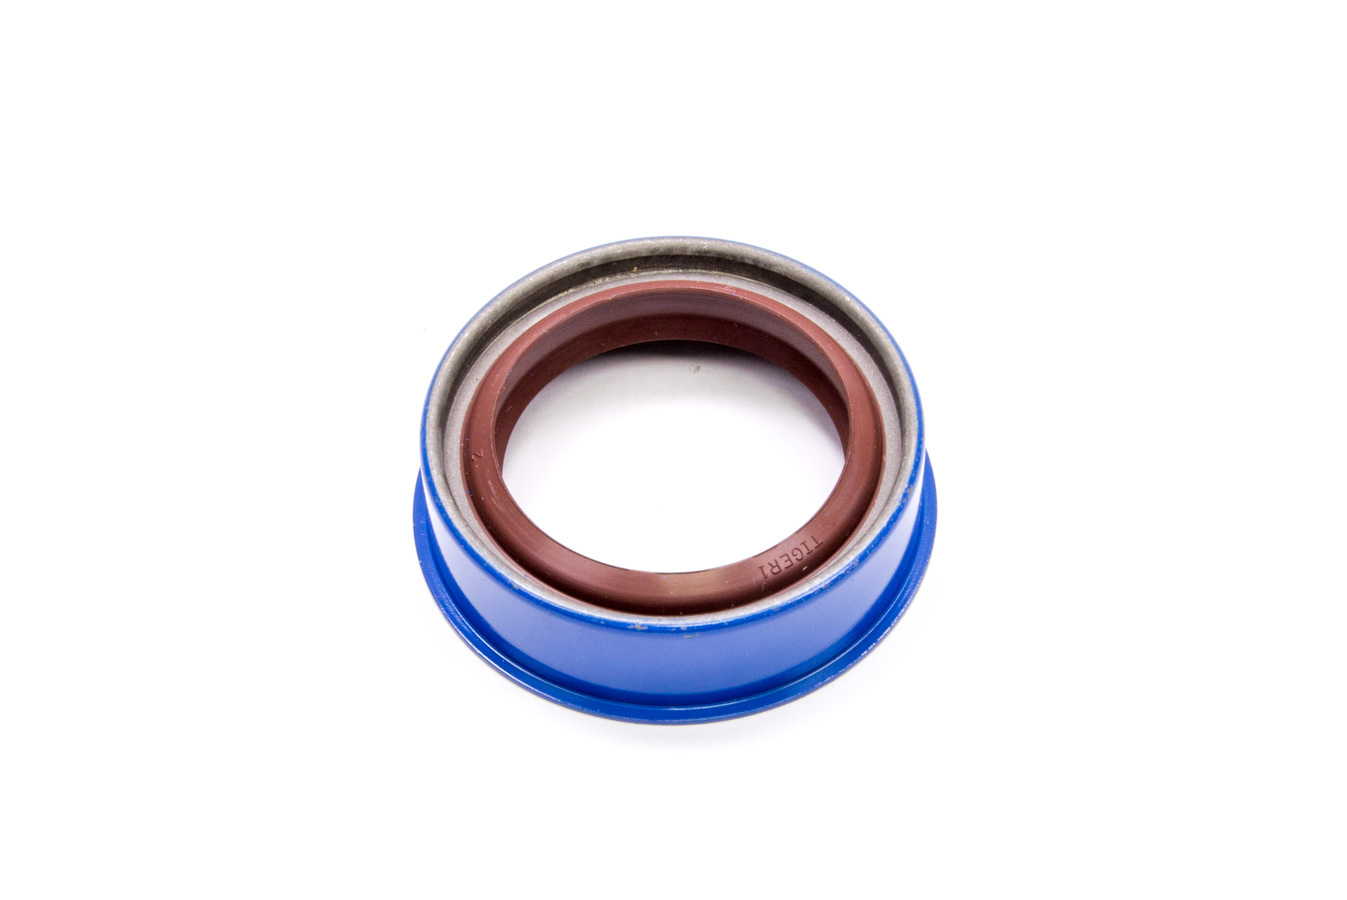 Diversified Machine RRC-1002 - Lower Shaft Coupler Seal, PTFE / Steel, DMI CT1 Quick Change Rear Ends, Each